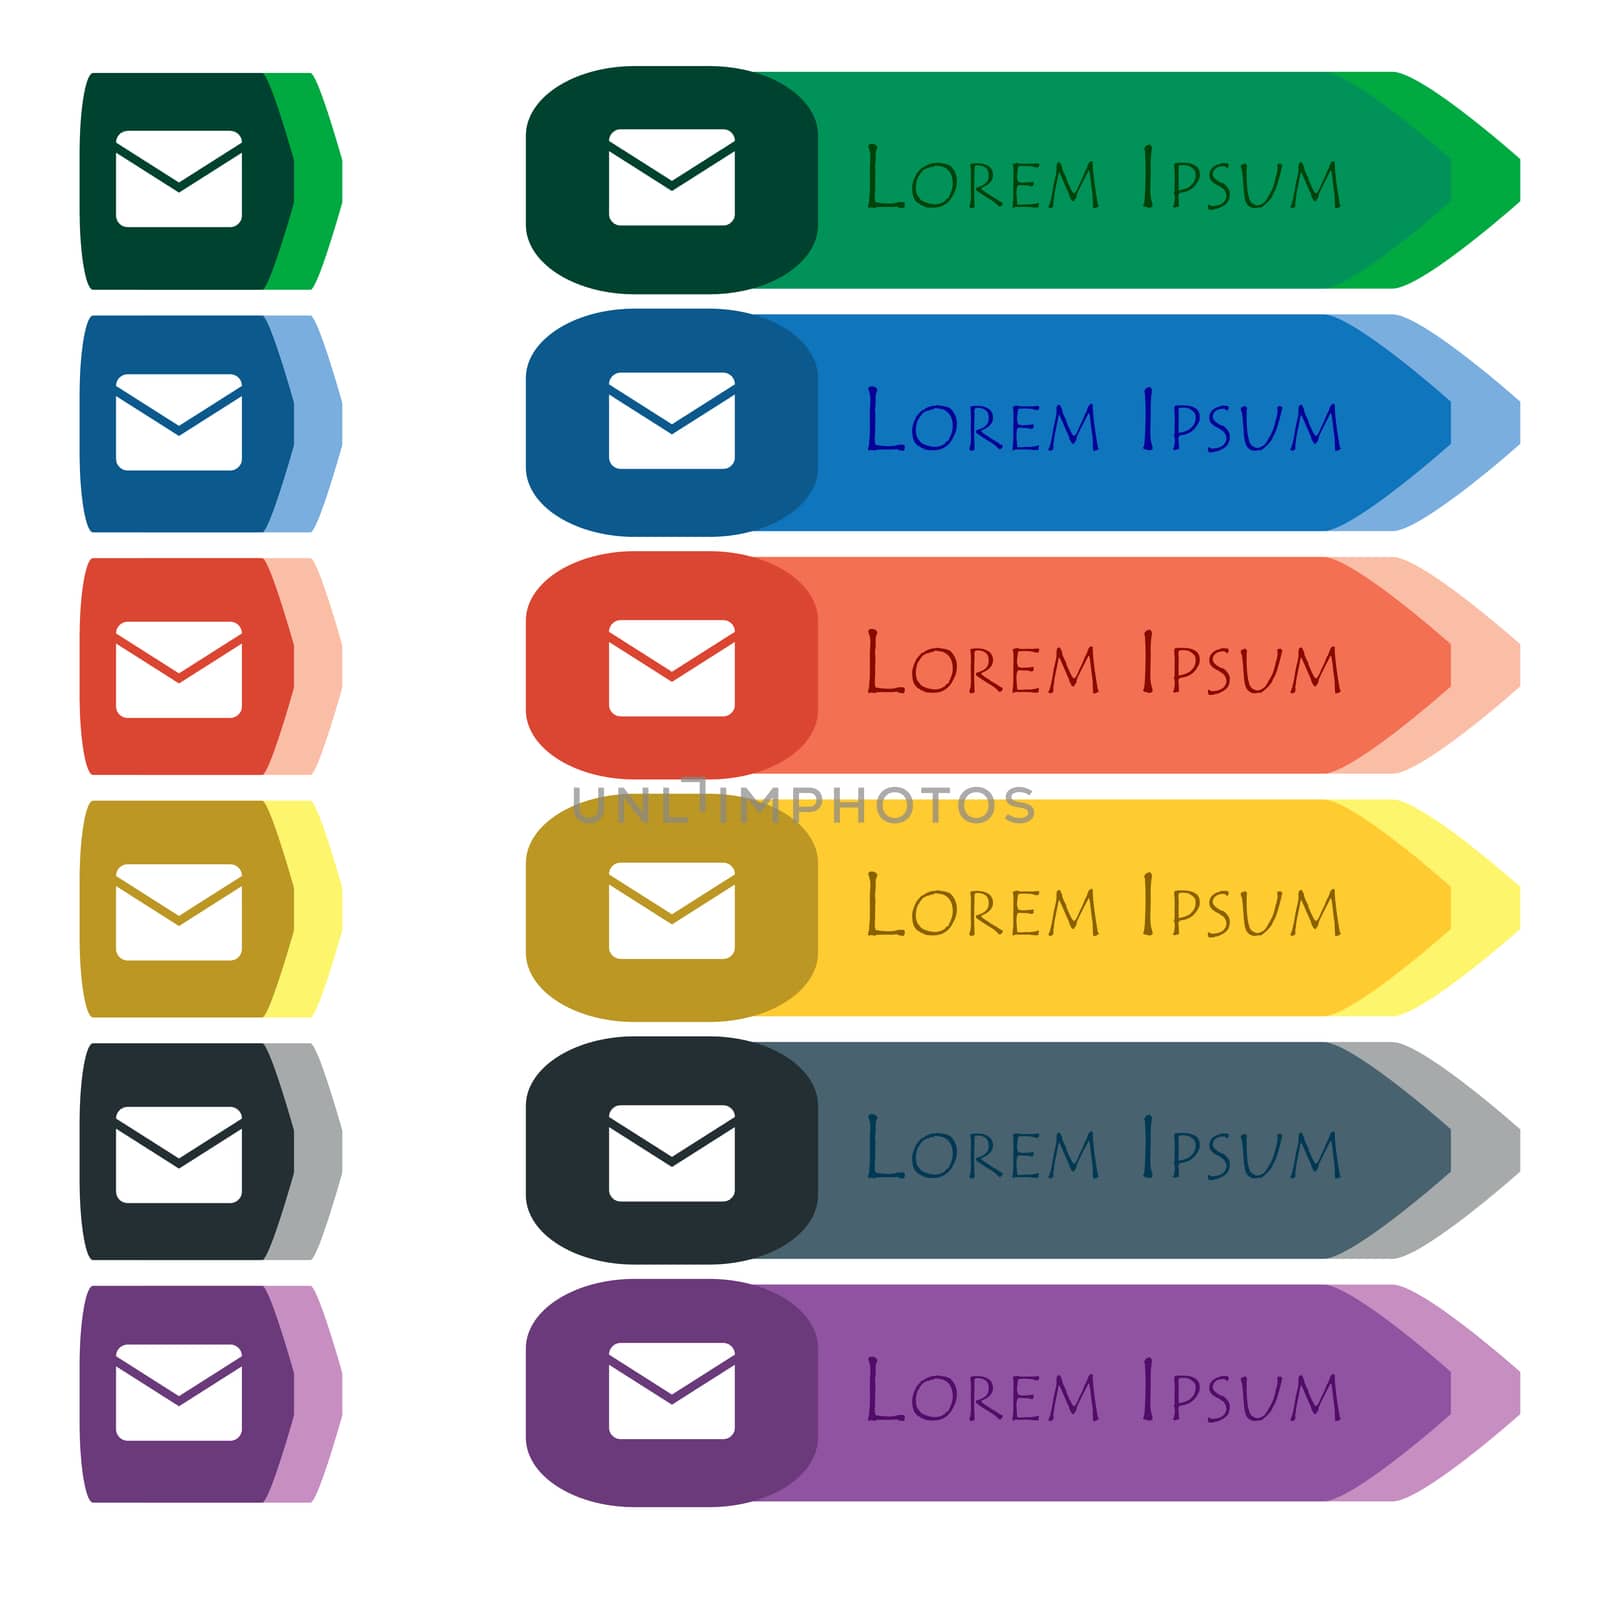 Mail, Envelope, Message icon sign. Set of colorful, bright long buttons with additional small modules. Flat design by serhii_lohvyniuk